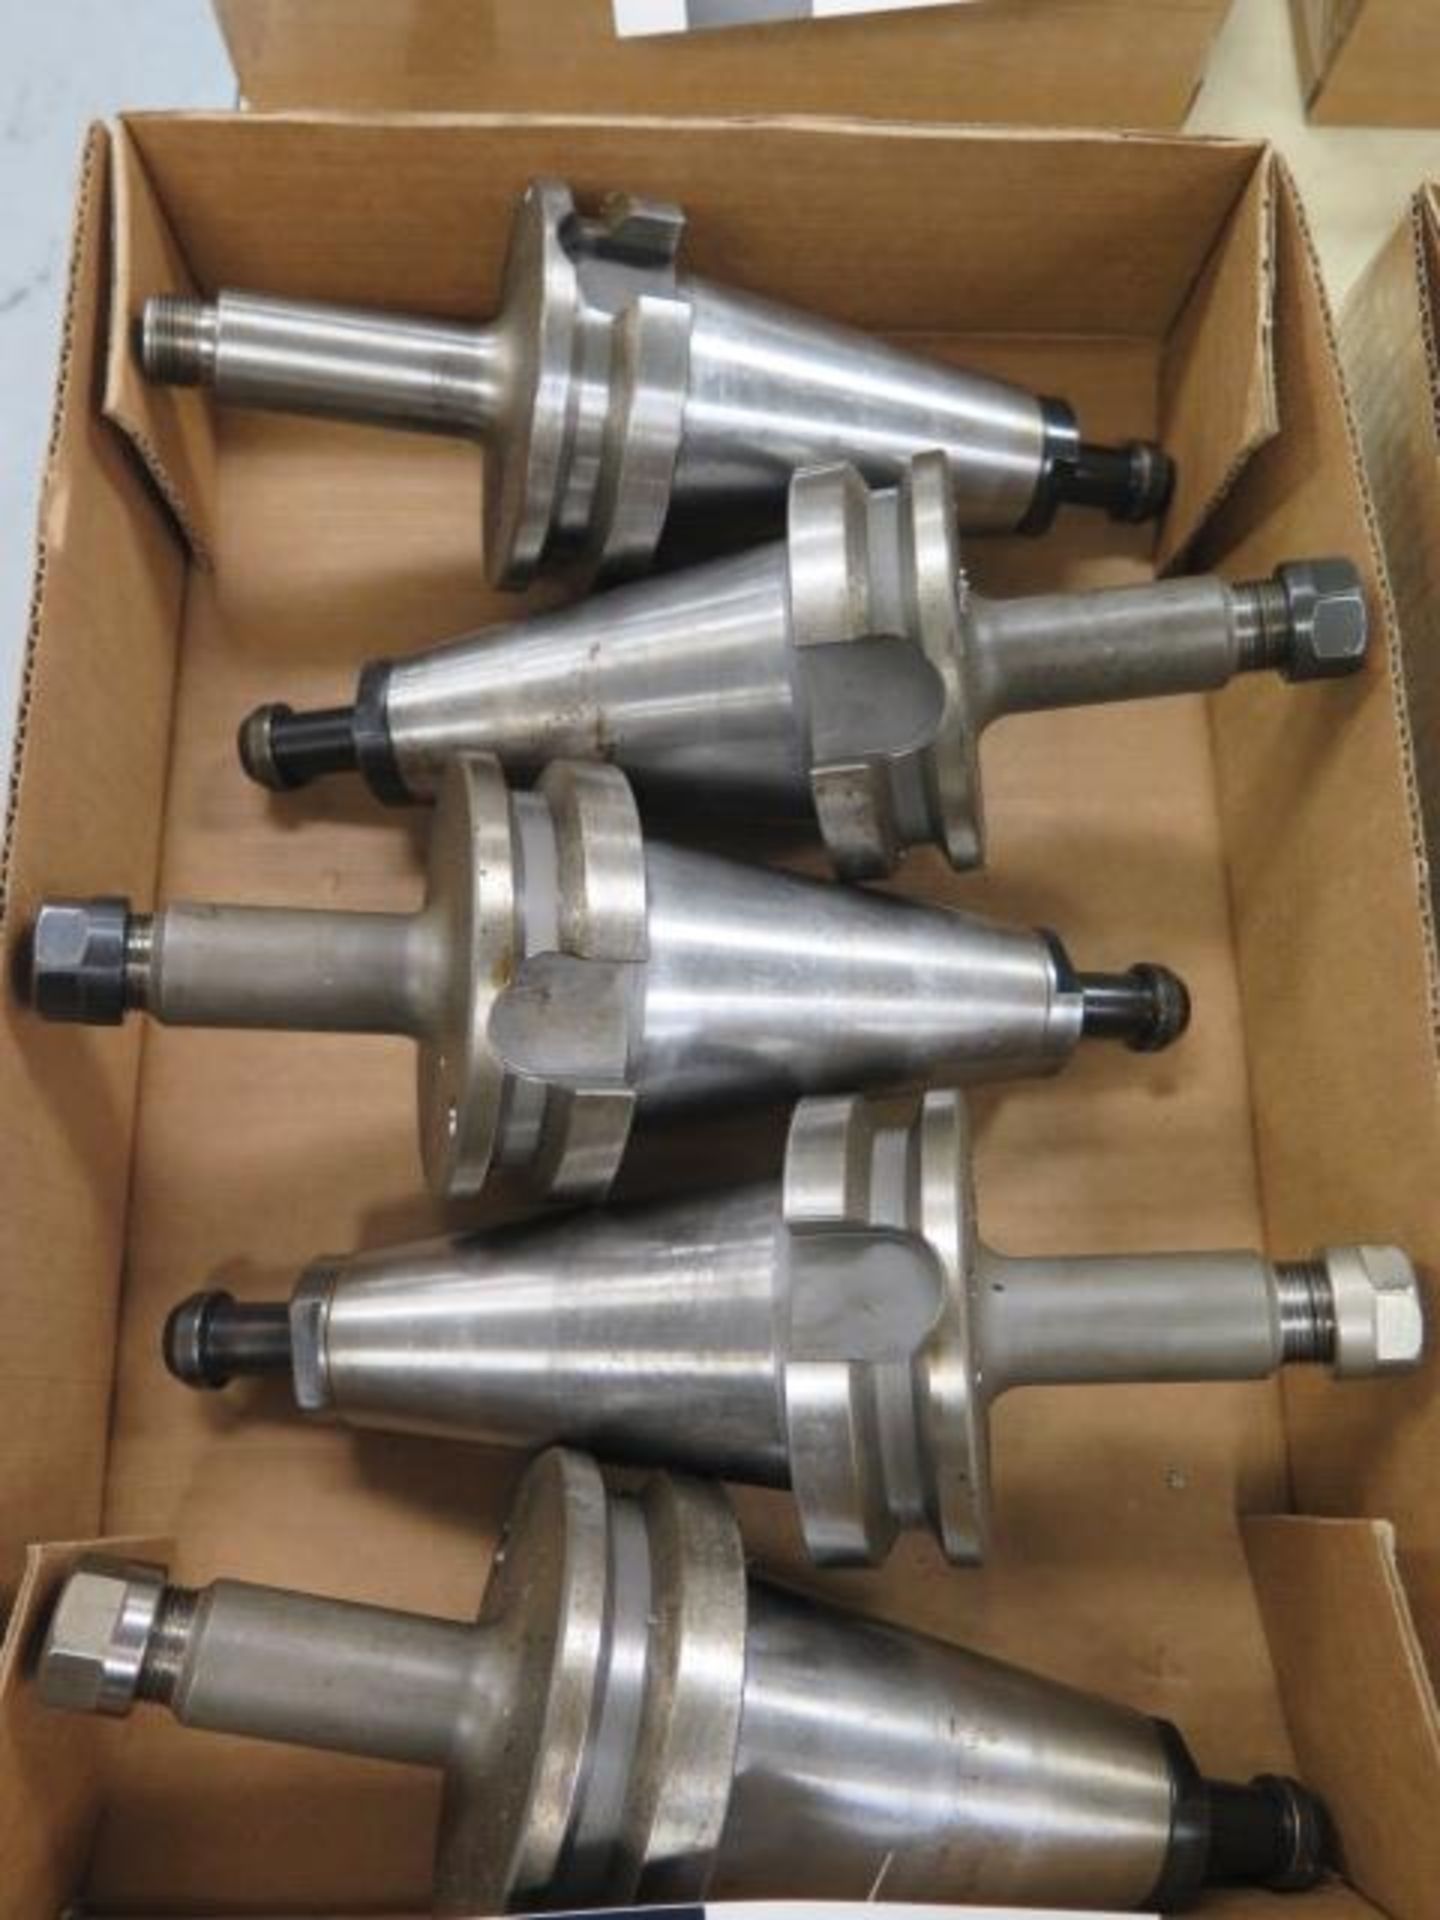 BT-50 Taper ER16 Collet chucks (5) (SOLD AS-IS - NO WARRANTY) (Located @ 2229 Ringwood Ave. San Jose - Image 2 of 6